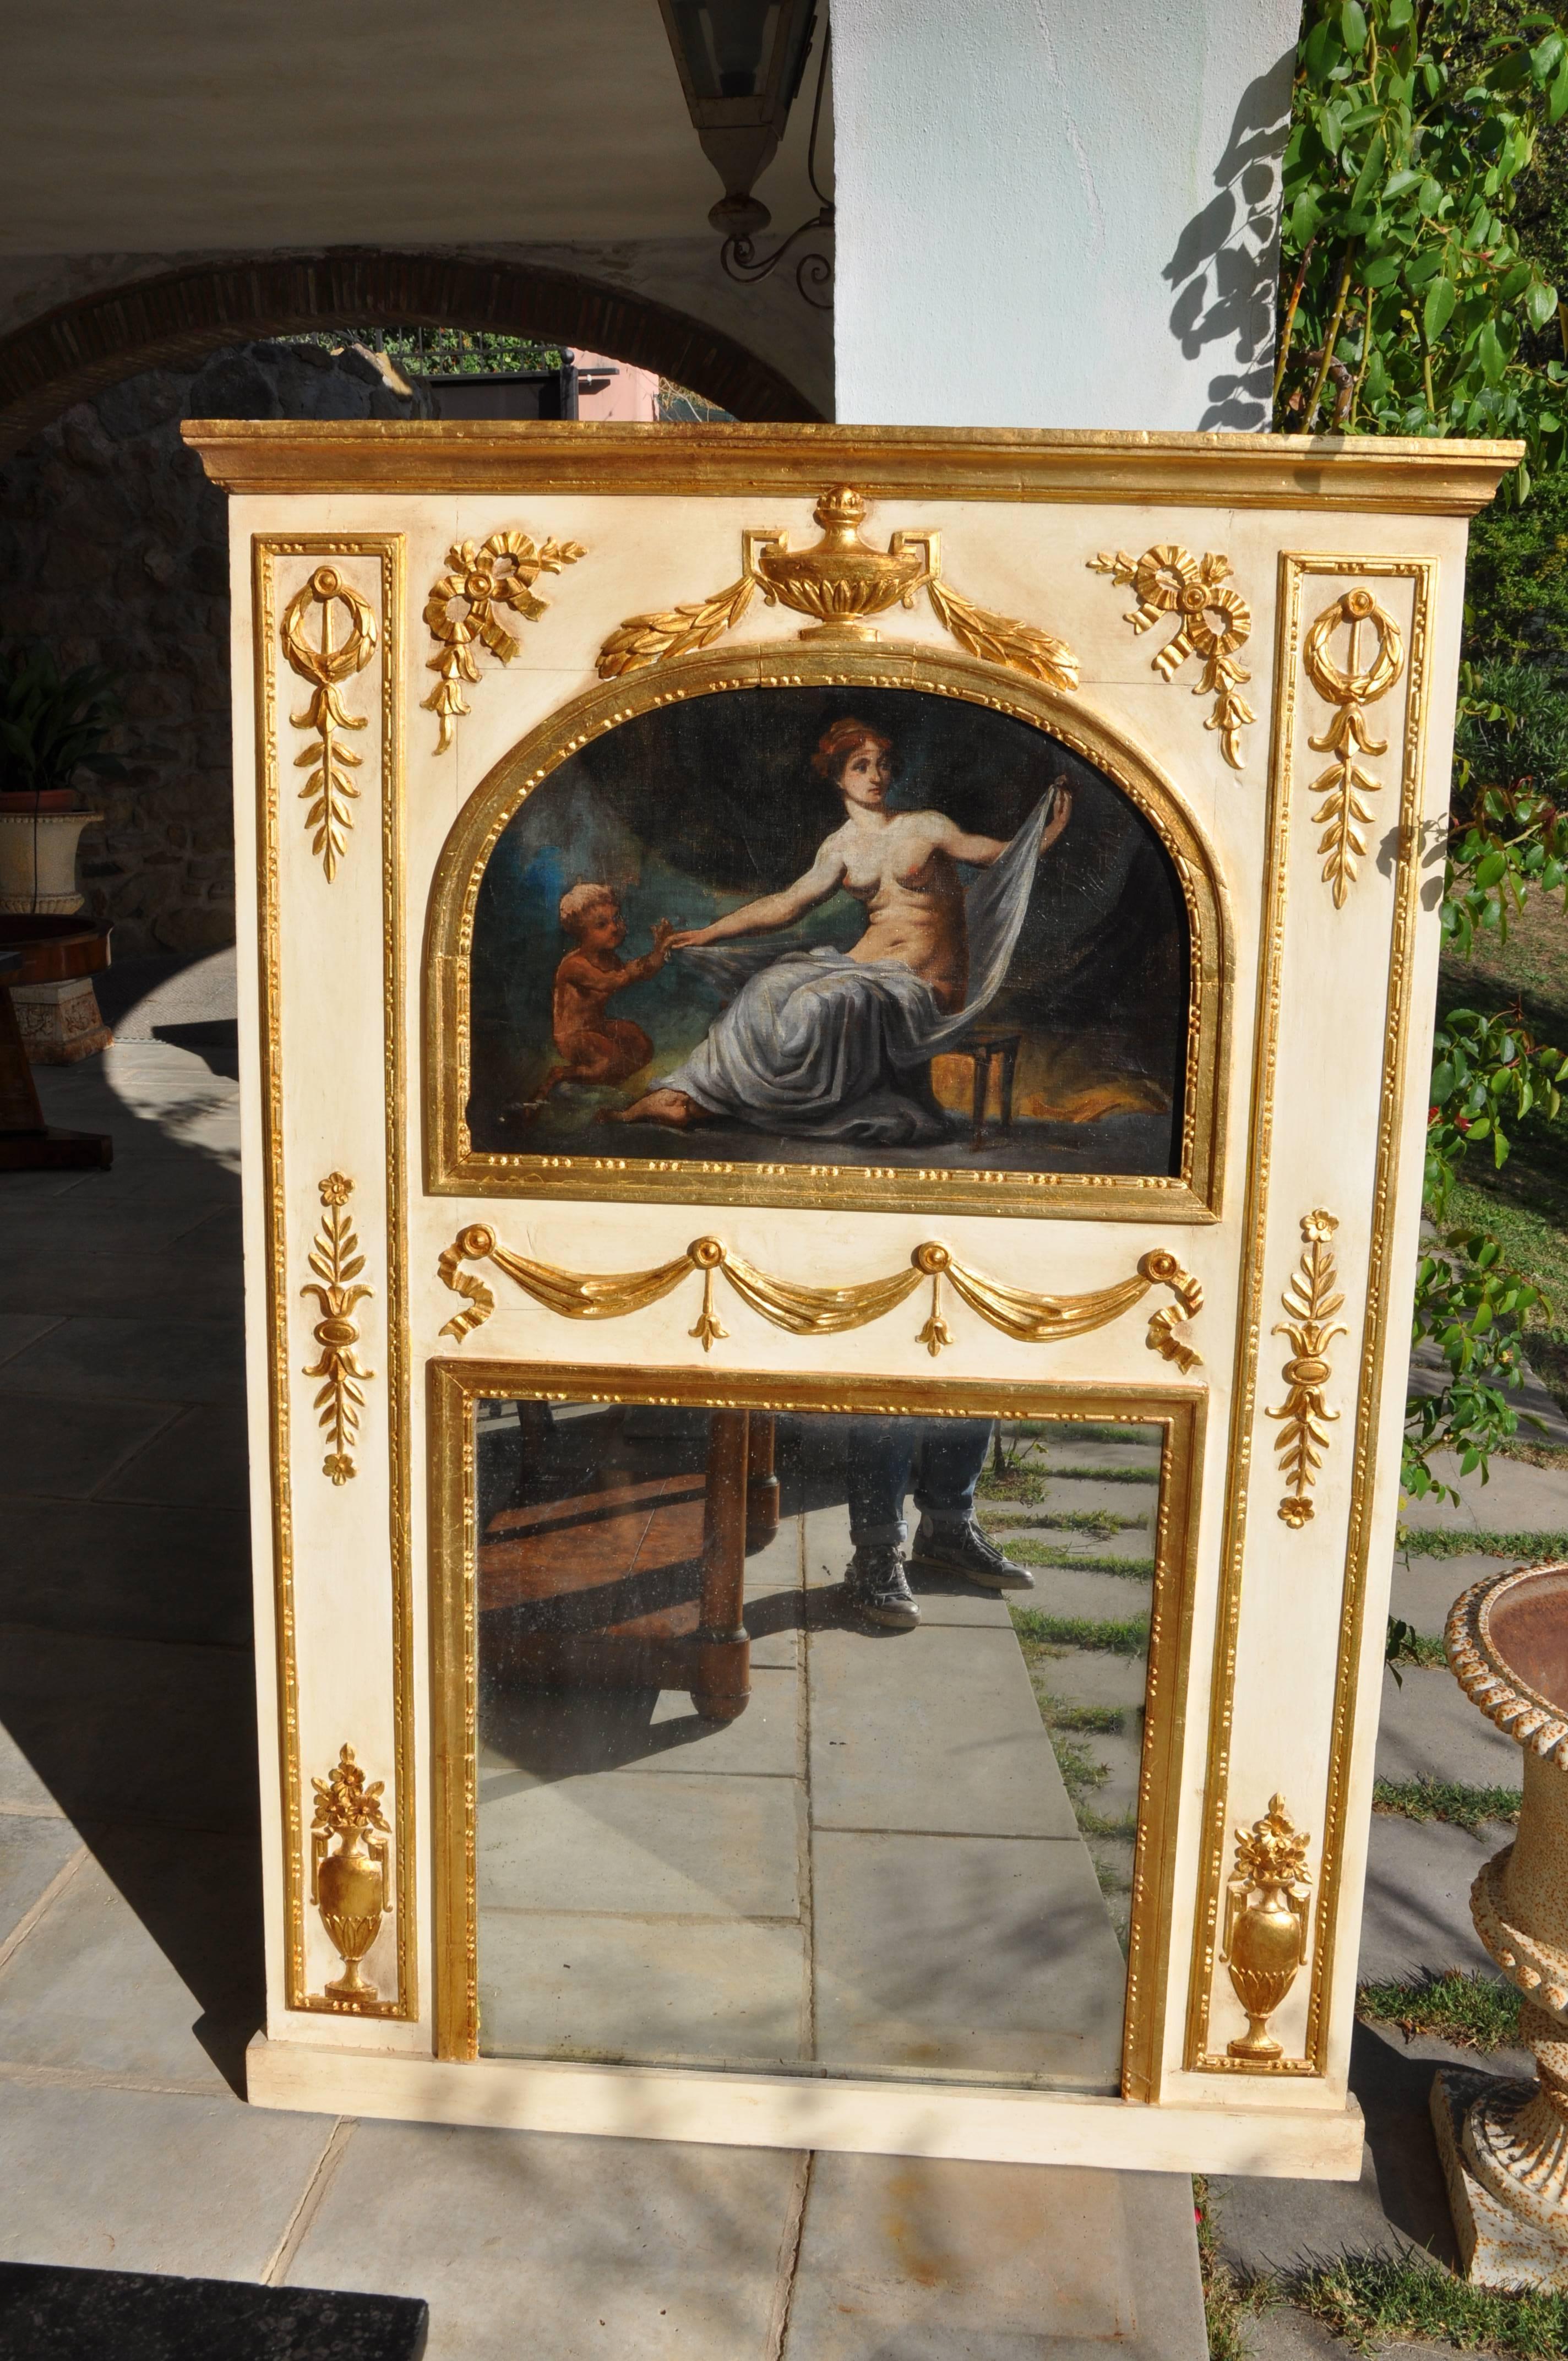 19th century. Rare mirror made of wood and pastel, lacquered and gold-plated gold leaf, with oil painting at the top. Sec XIX (1820-1840). The mirror measures 123 x 175 cm. The mirror is original in all its parts.